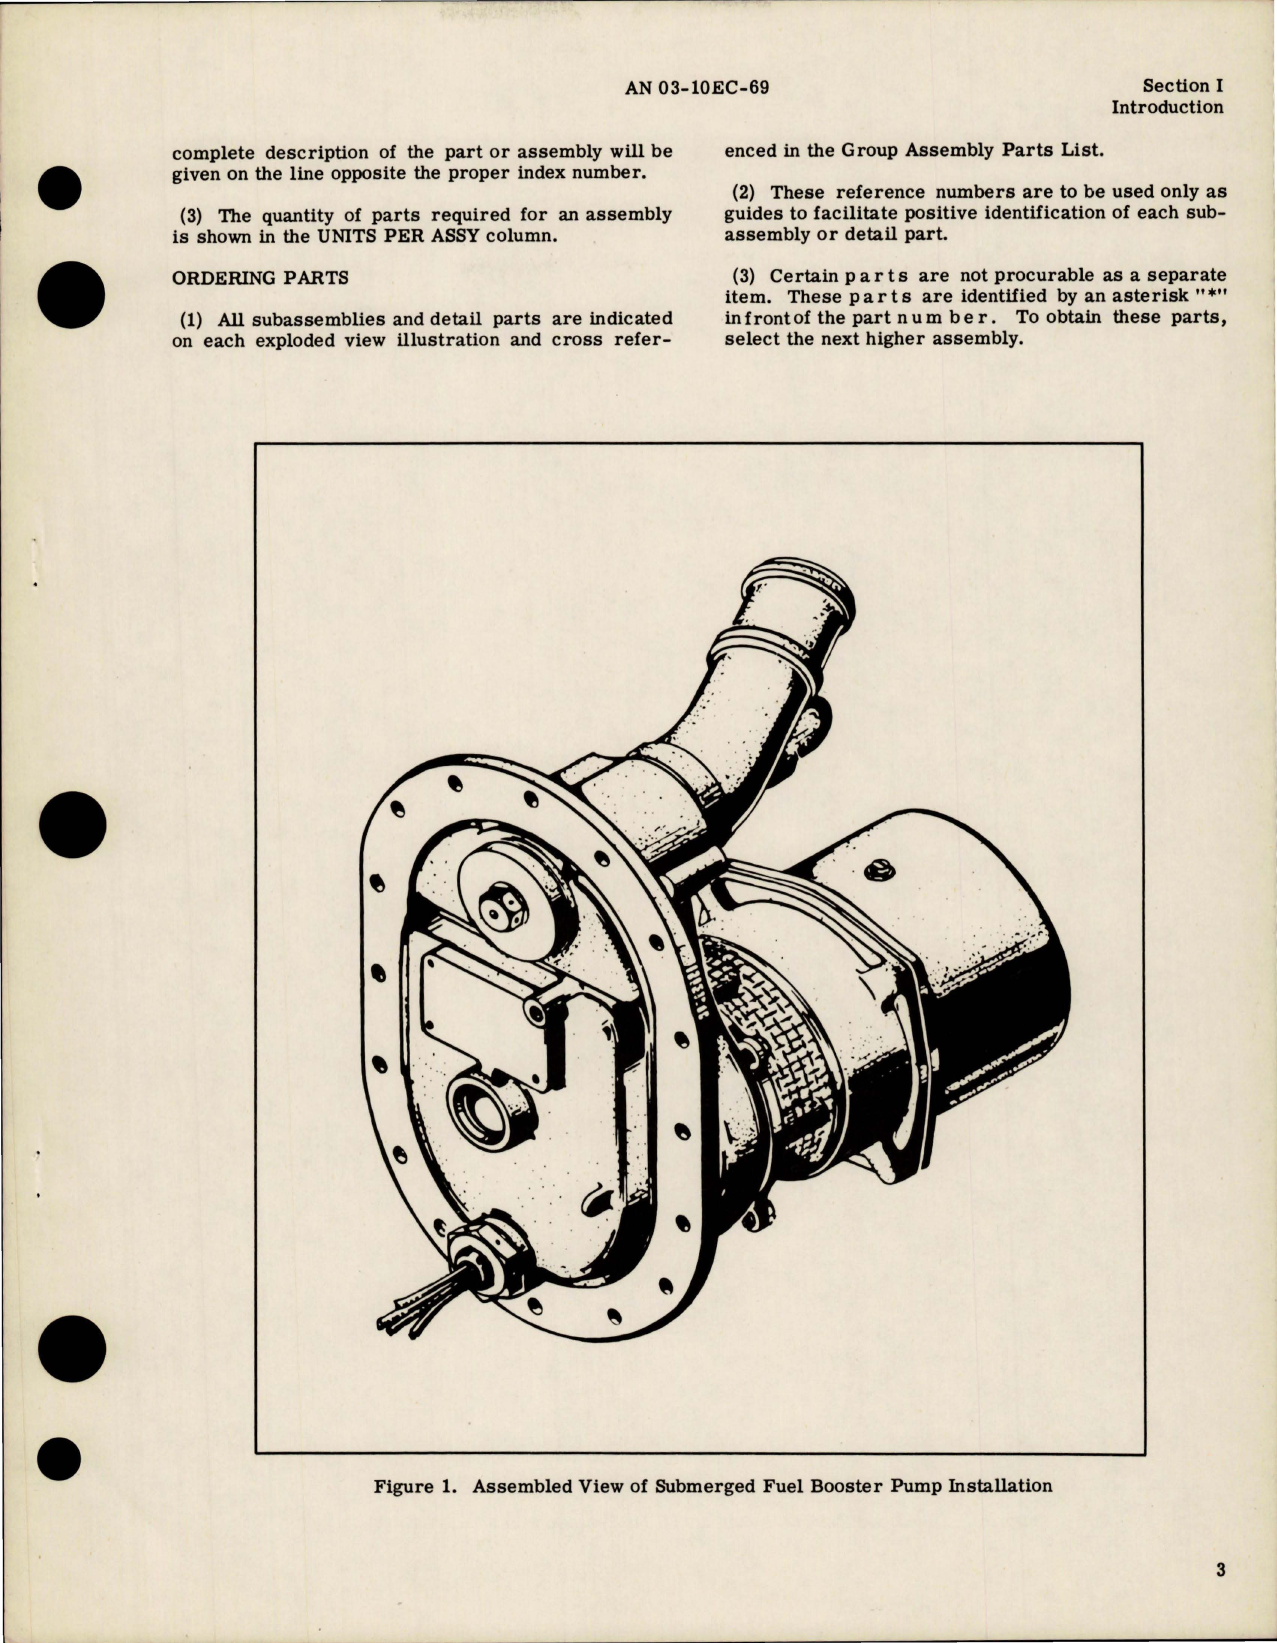 Sample page 5 from AirCorps Library document: Illustrated Parts Breakdown for Submerged Fuel Booster Pump - Models TF57000-1, TF59700 and TF59700-1